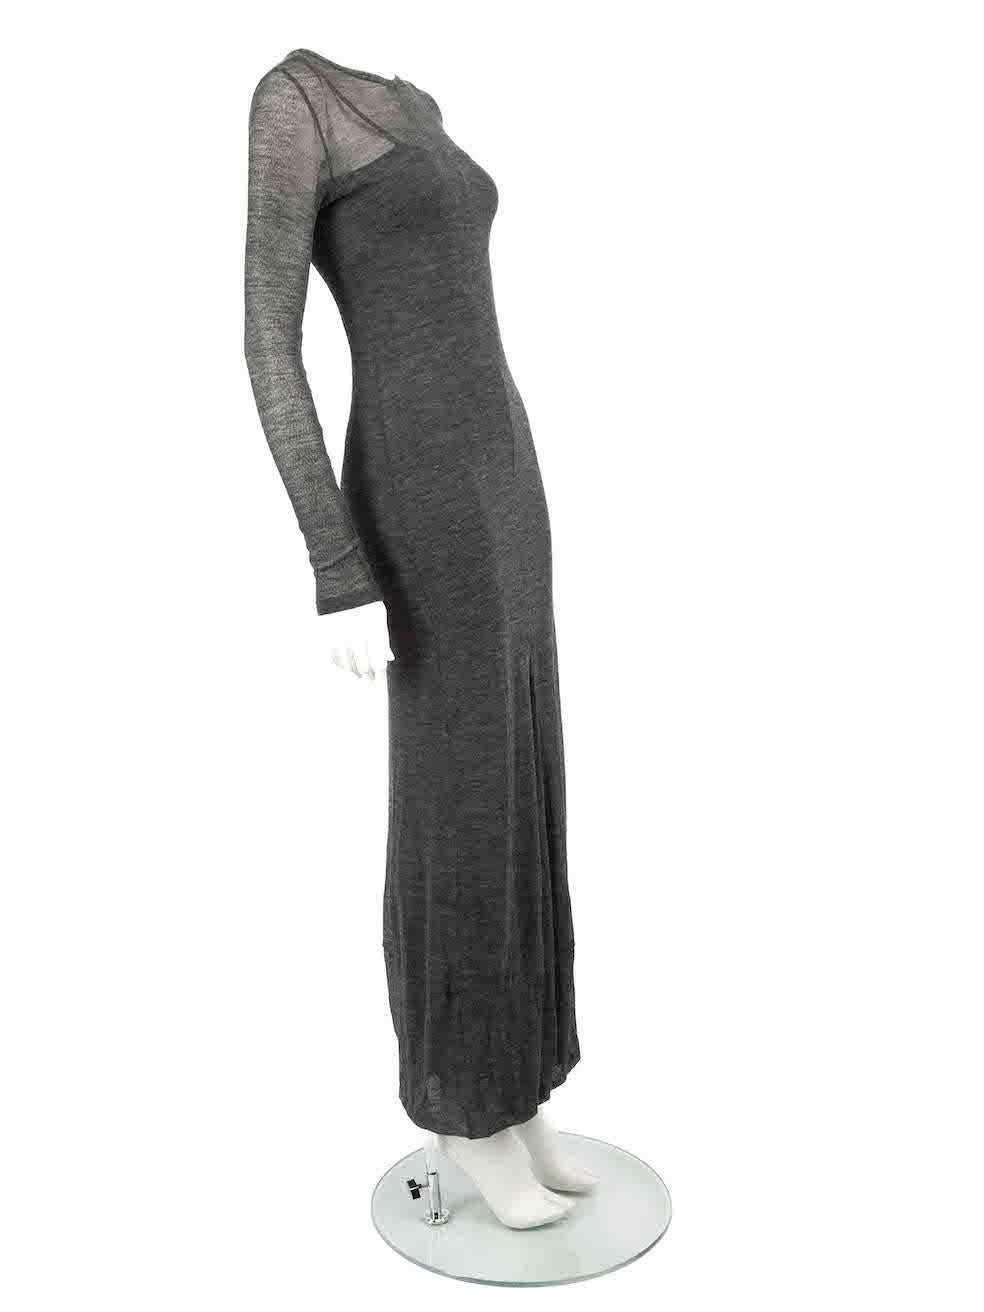 CONDITION is Good. Minor wear to dress is evident. Some small marks to the front of the dress on this used Alberta Ferretti designer resale item.
 
 
 
 Details
 
 
 Grey
 
 Synthetic
 
 Knit dress
 
 Maxi
 
 Long sleeves
 
 Sheer
 
 Round neck
 
